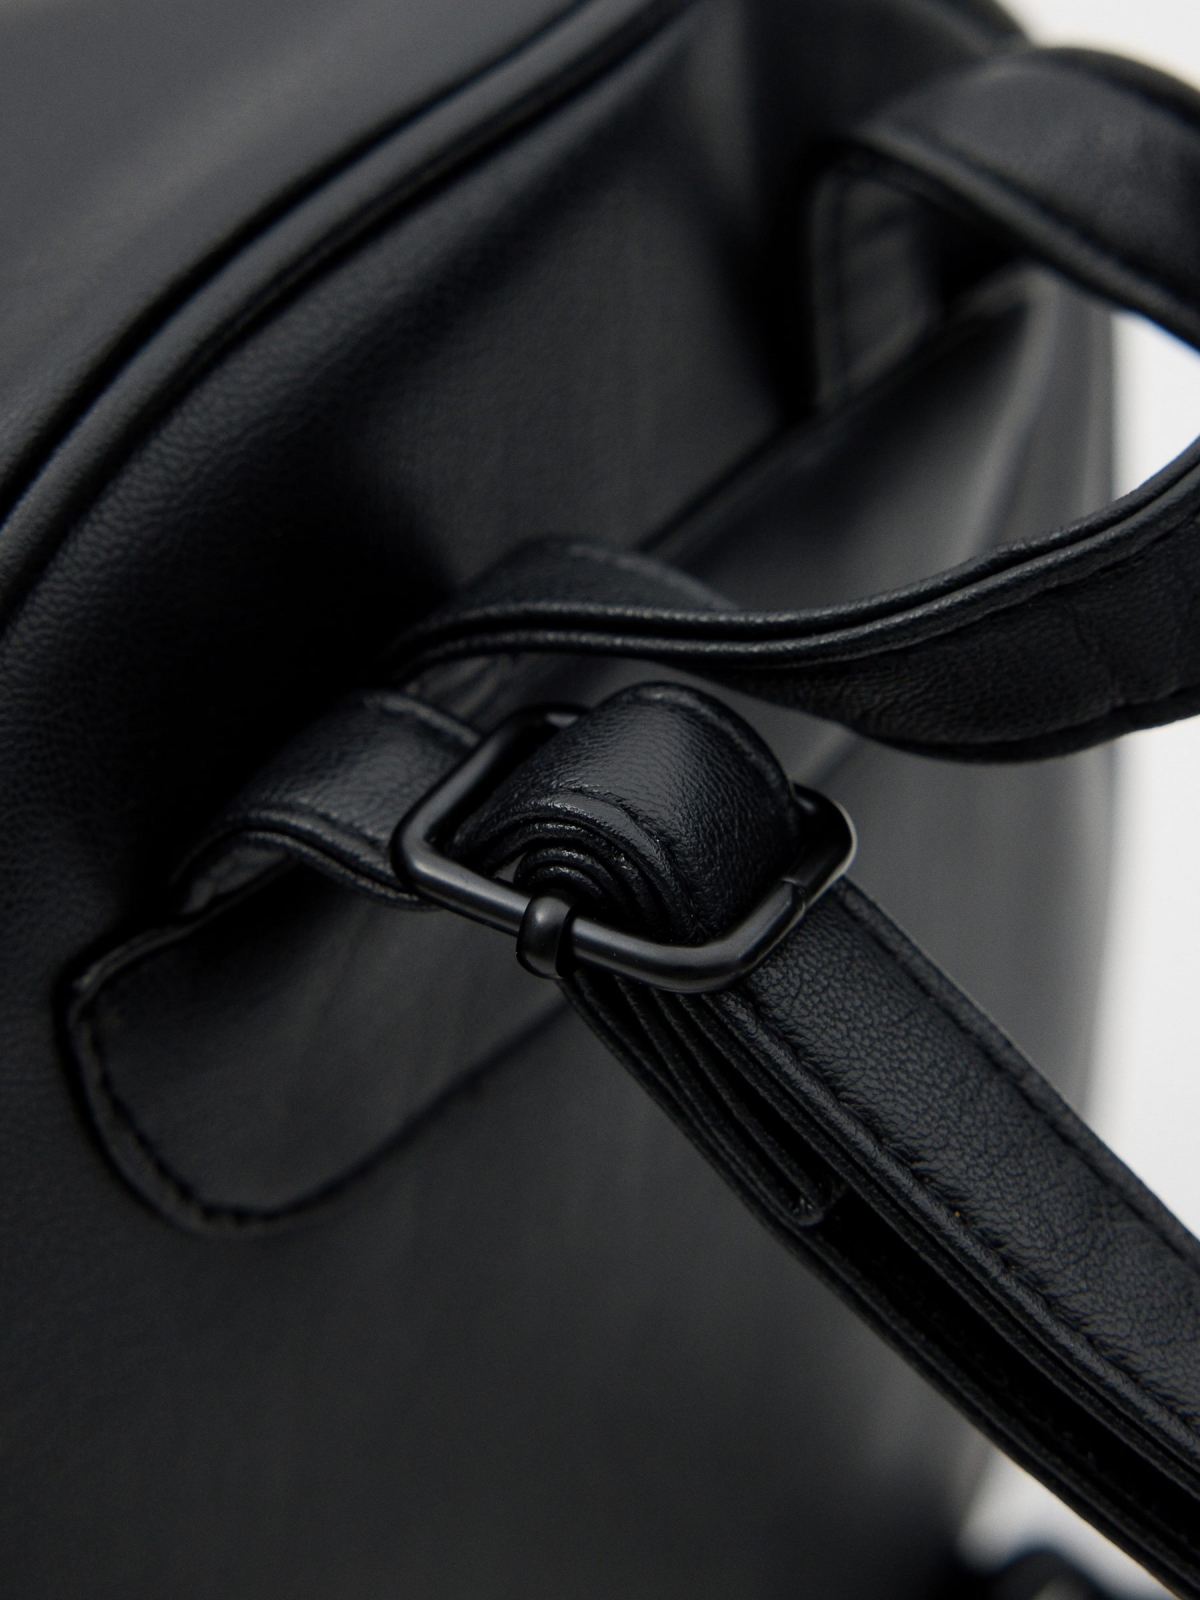 Leatherette casual backpack detail view